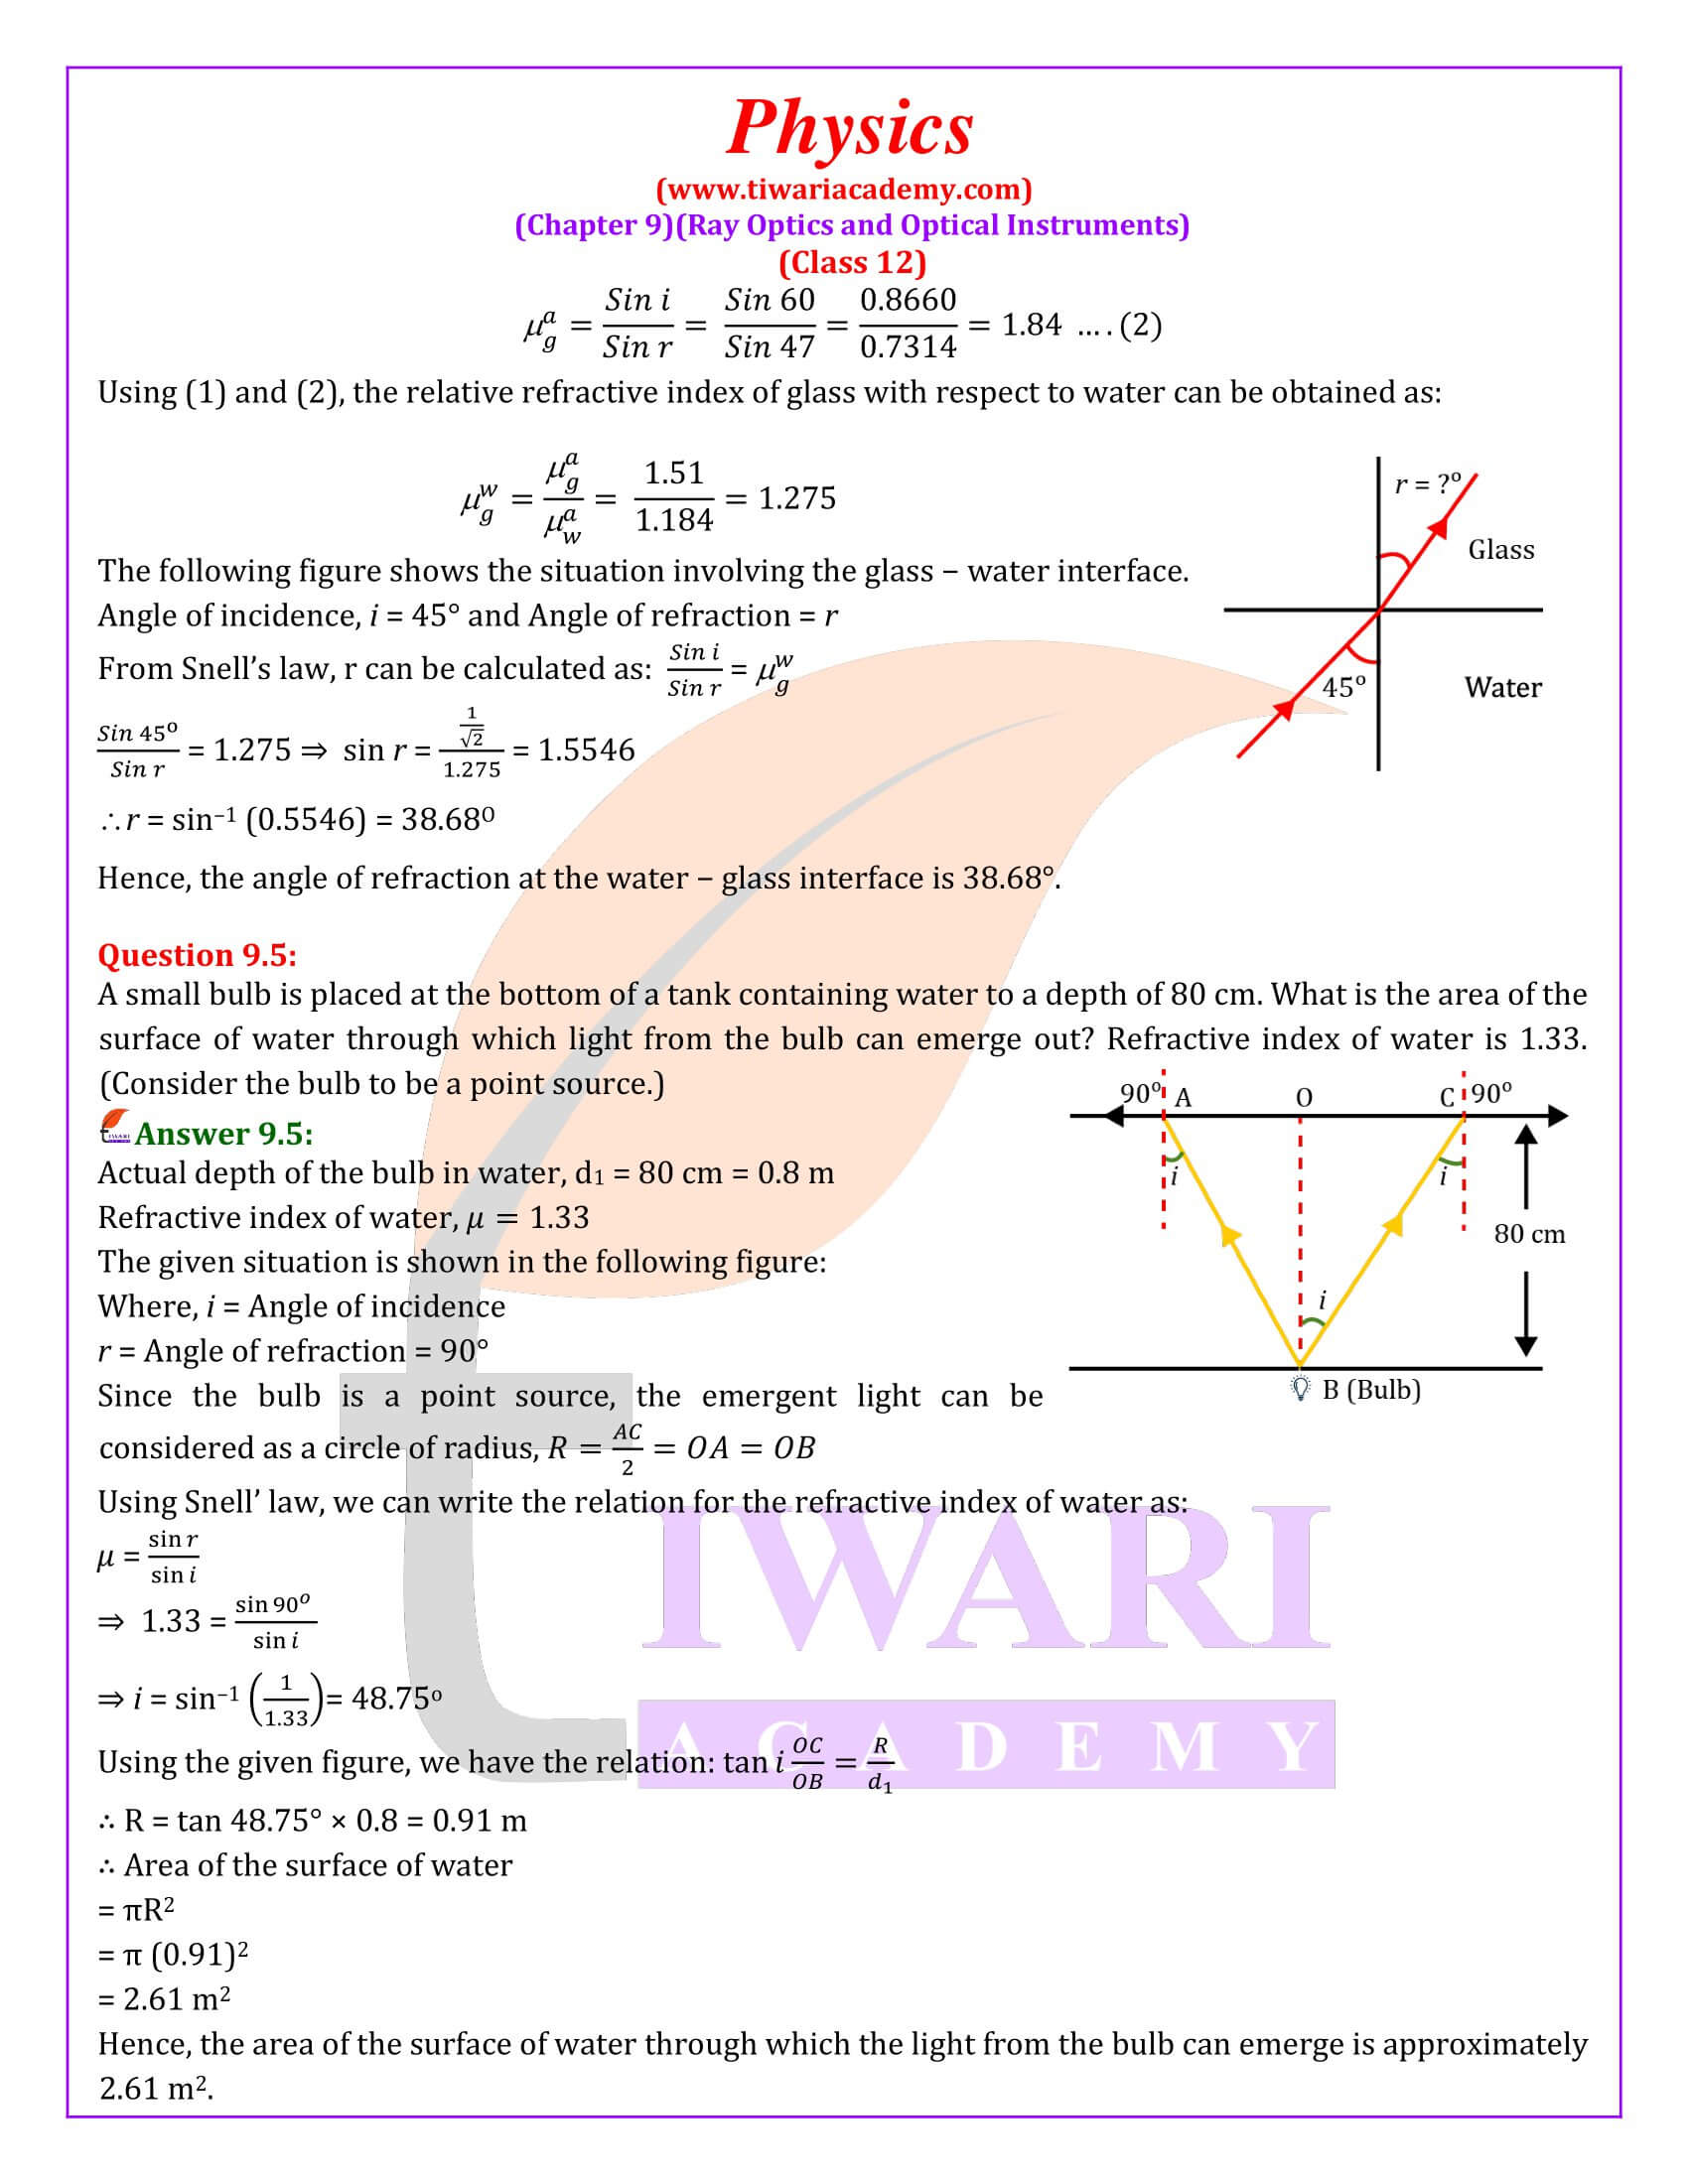 NCERT Solutions for Class 12 Physics Chapter 9